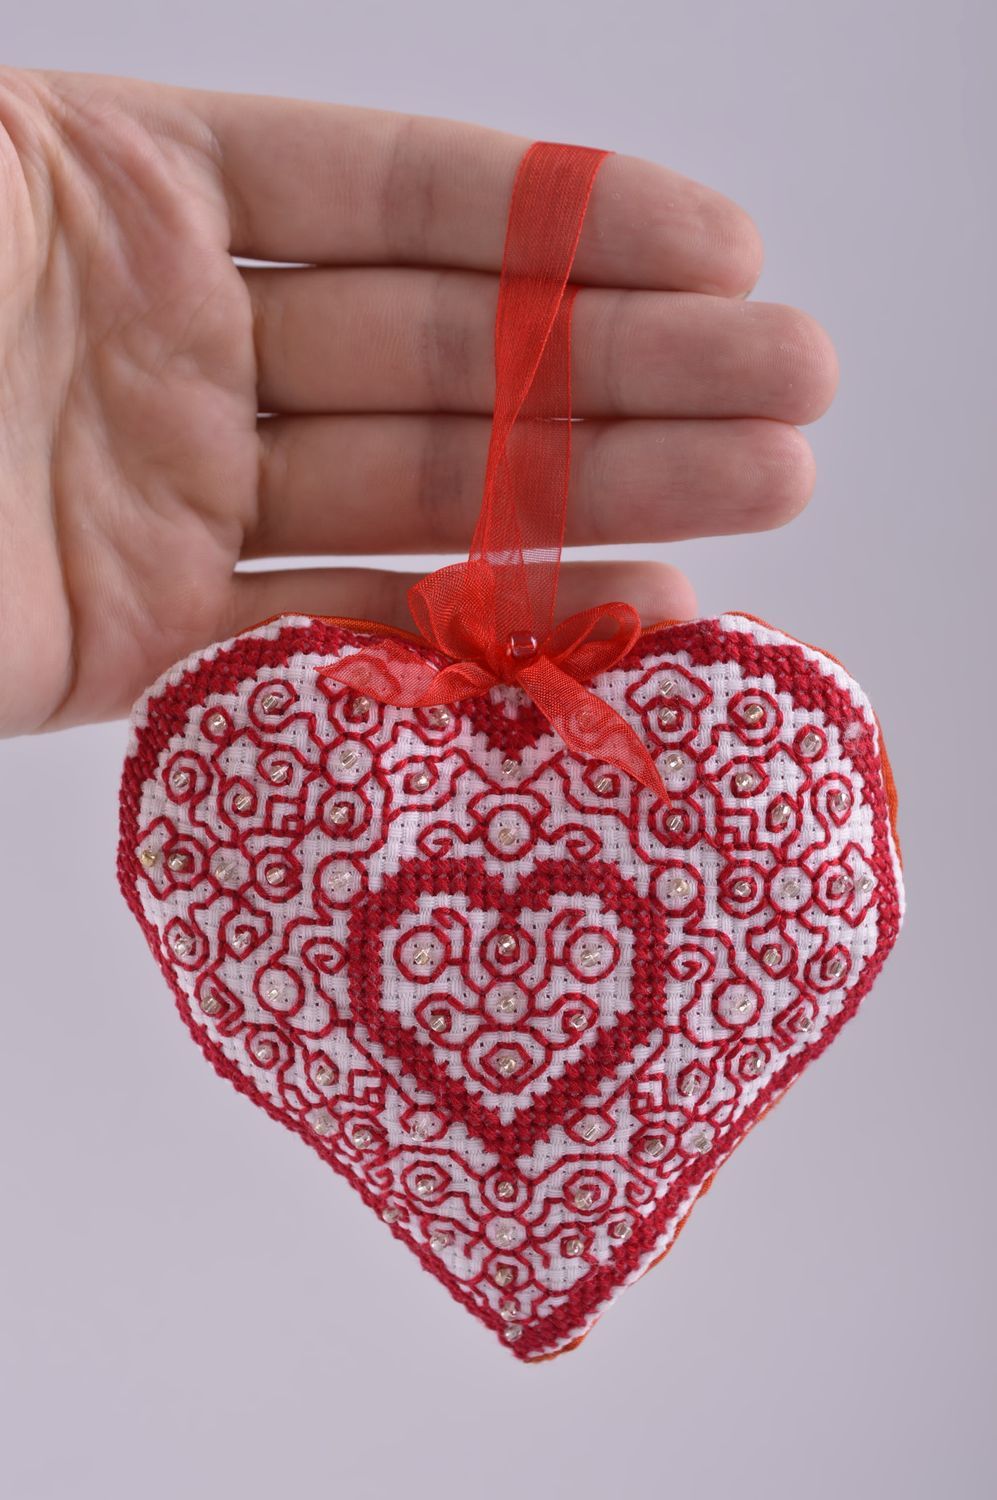 Homemade Christmas decor soft toy heart toy for decorative use Christmas gifts photo 5